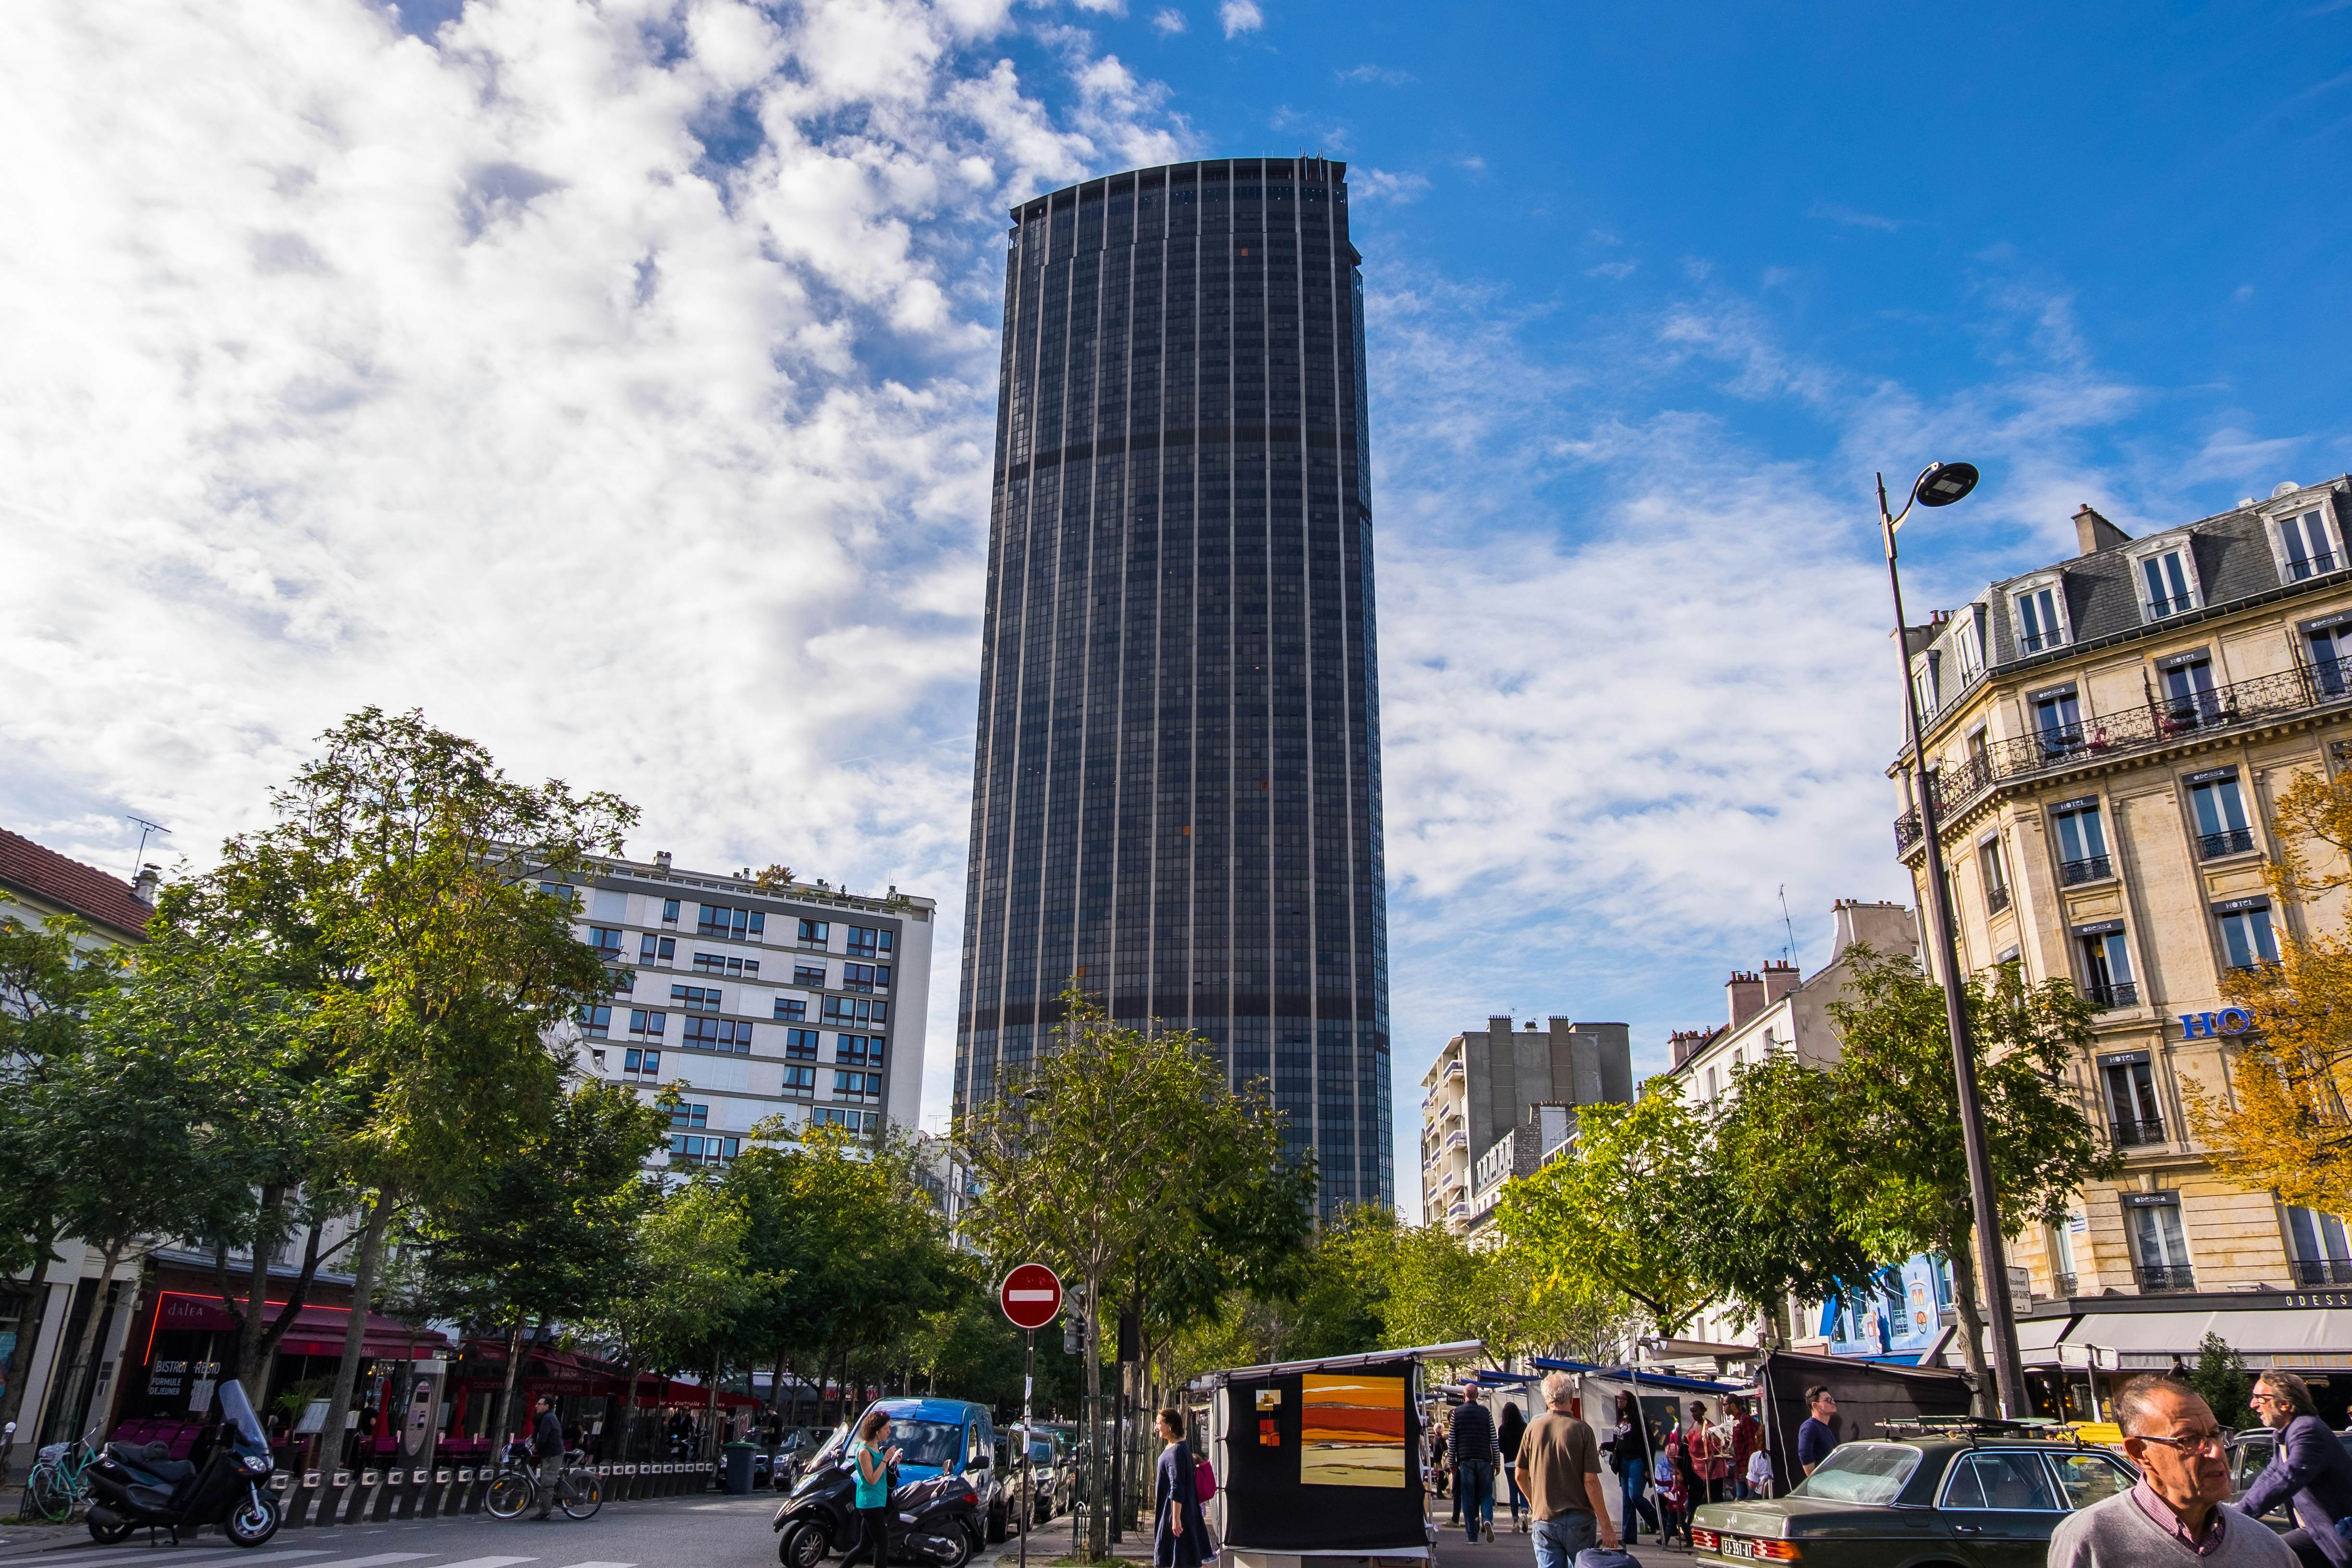 Closure of the Montparnasse Tower Observatory terrace